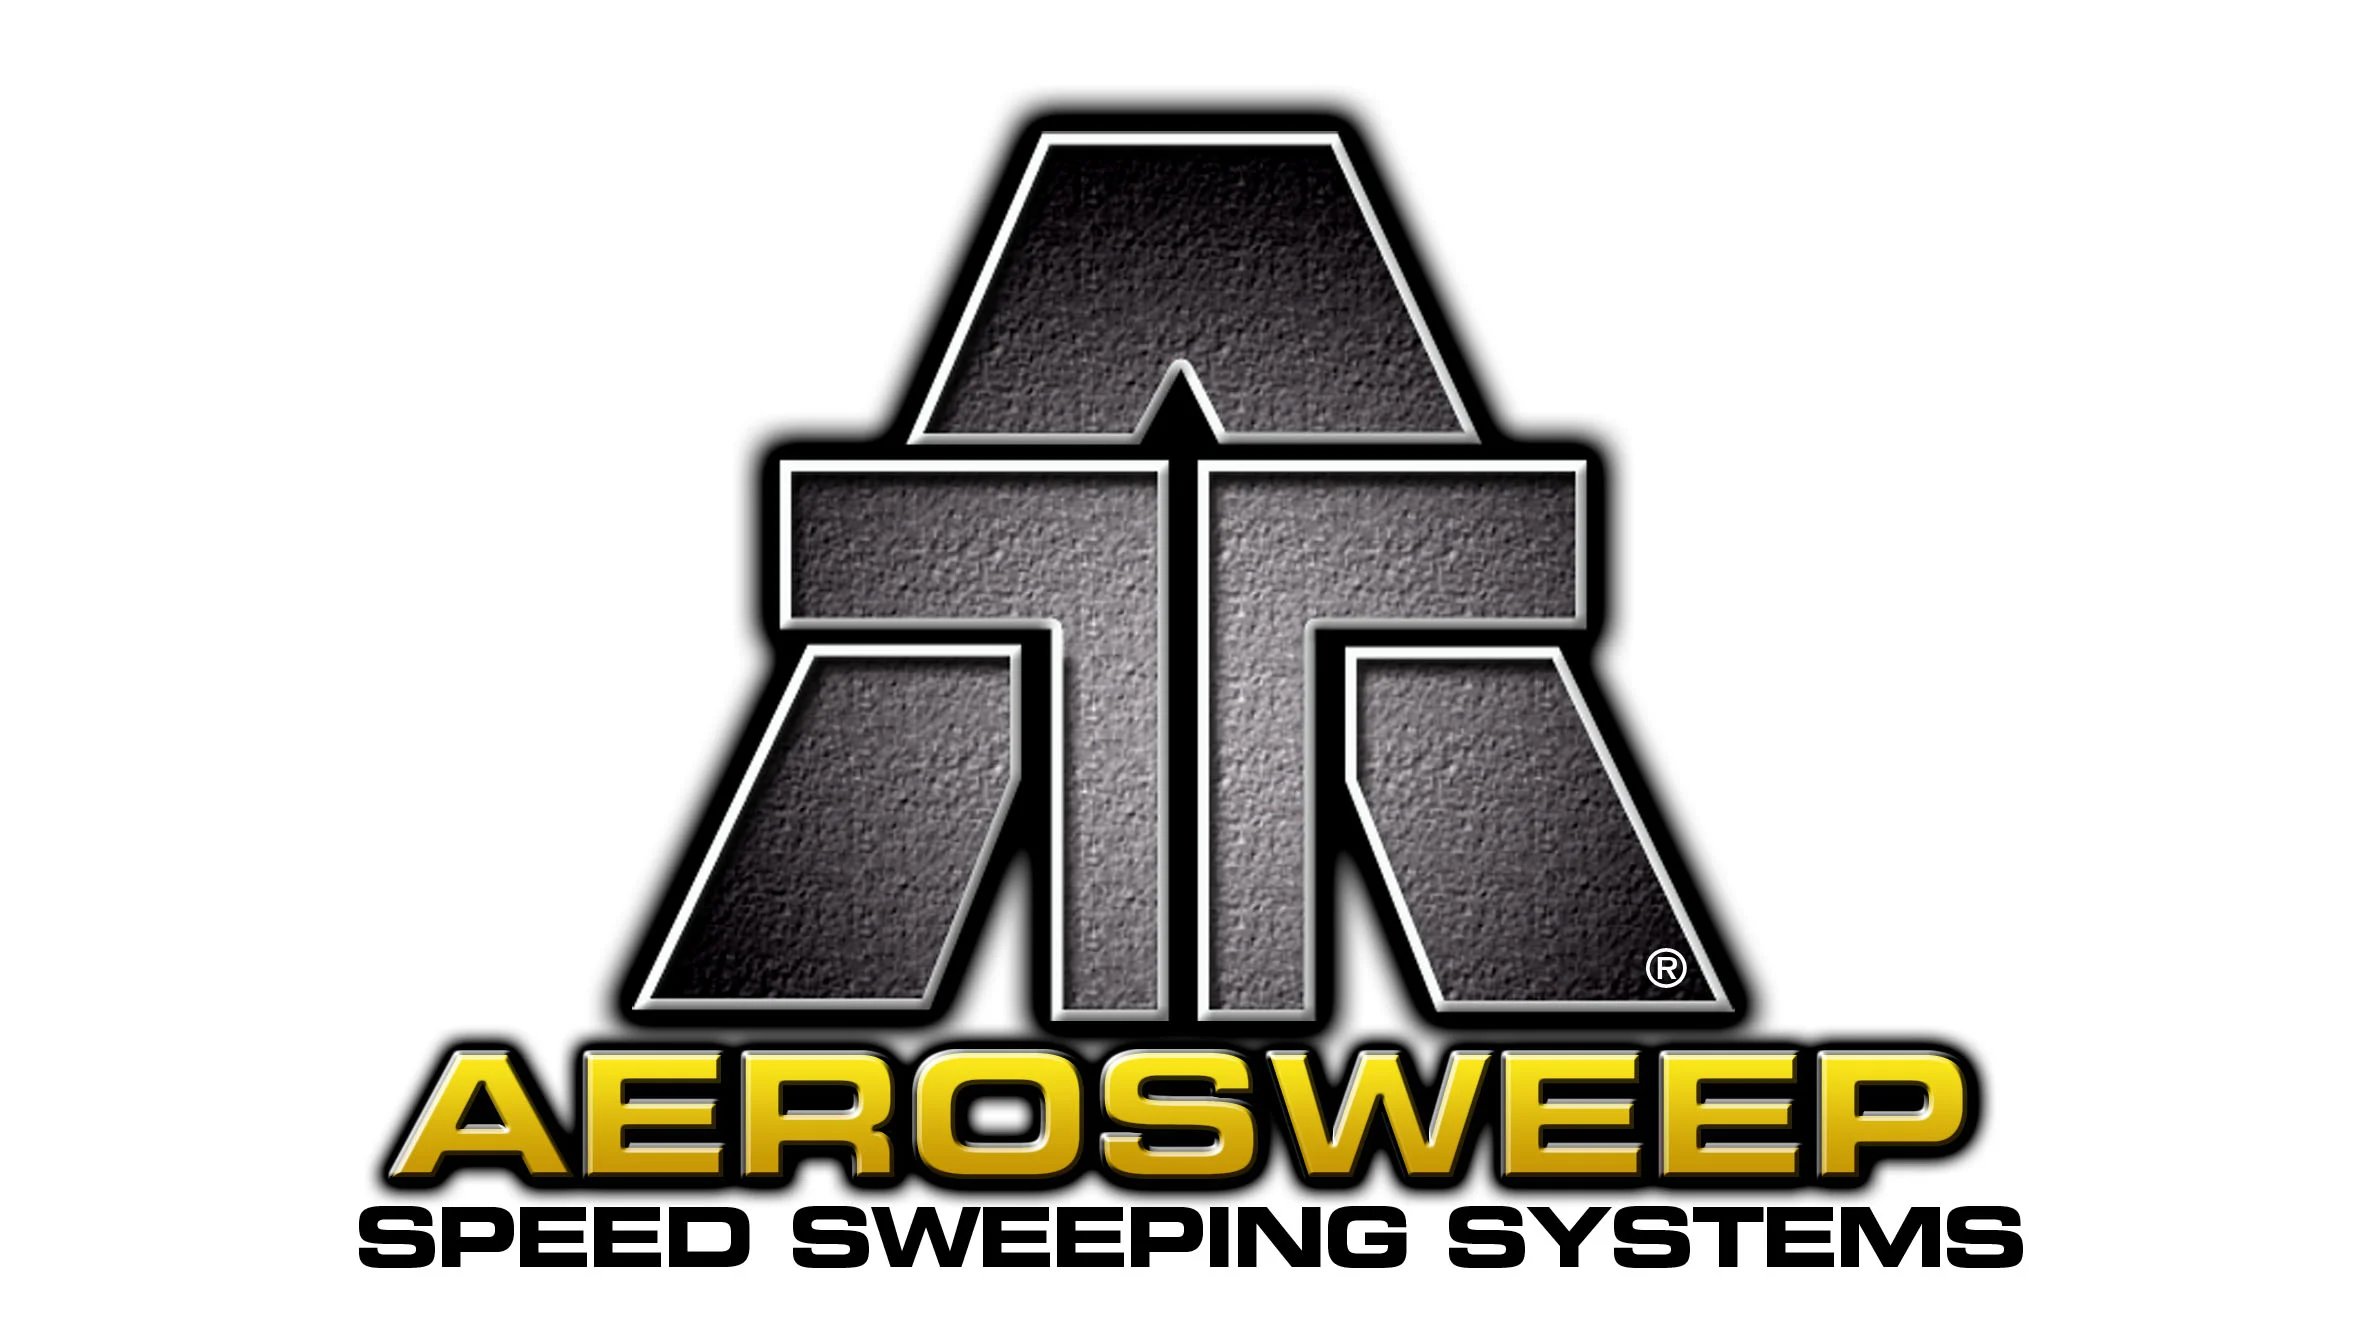 Aerosweep Speed Sweeping Systems logo